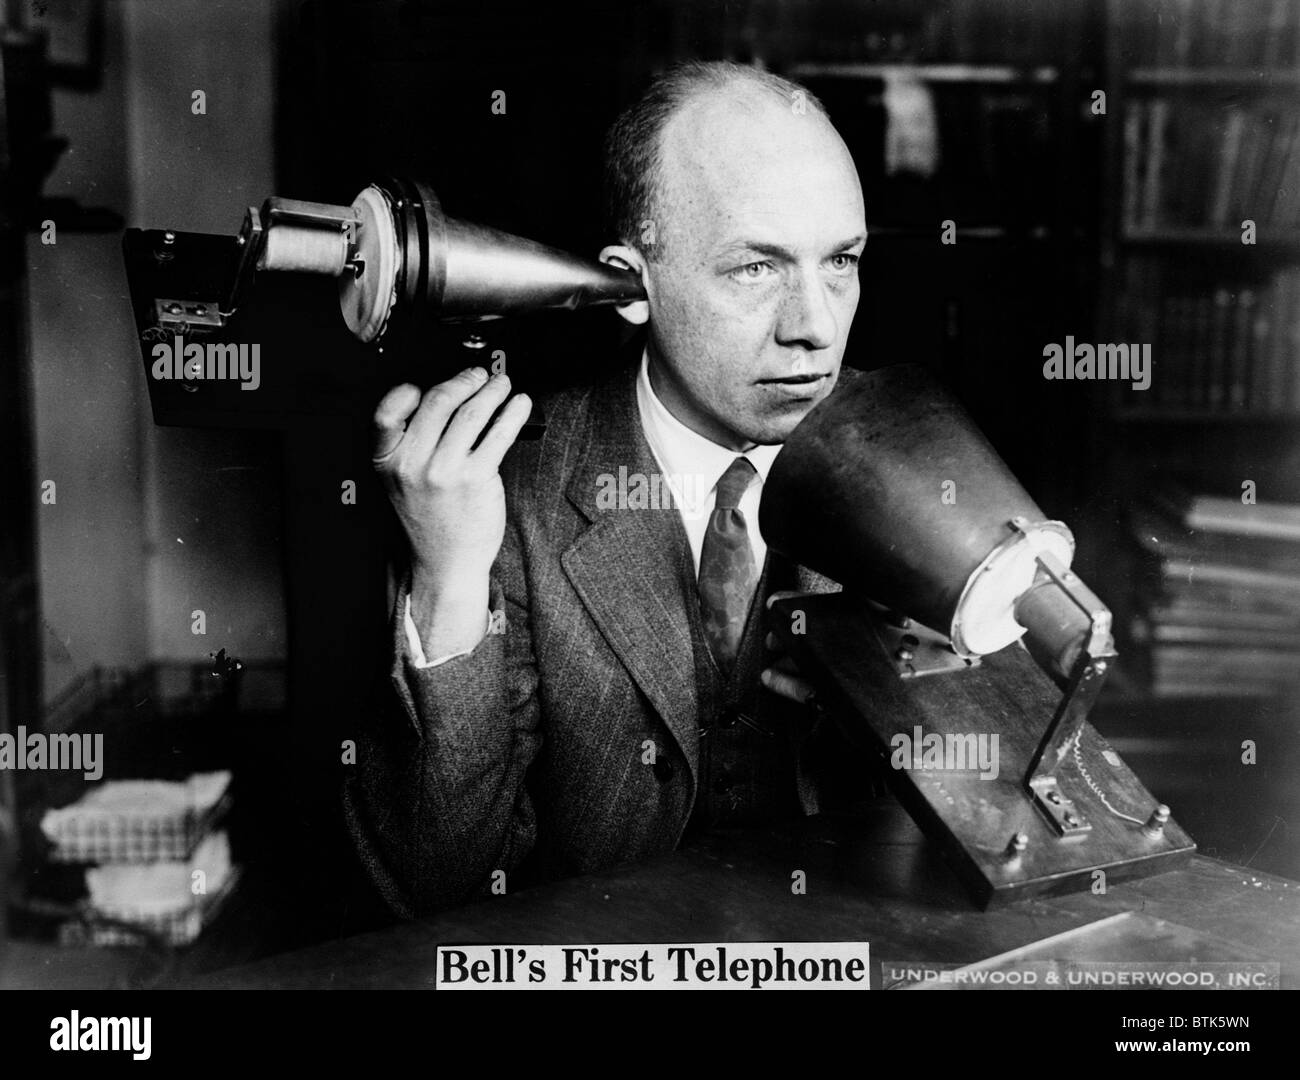 Bell's first telephone. Publicity photo ca. 1915-1925 Stock Photo